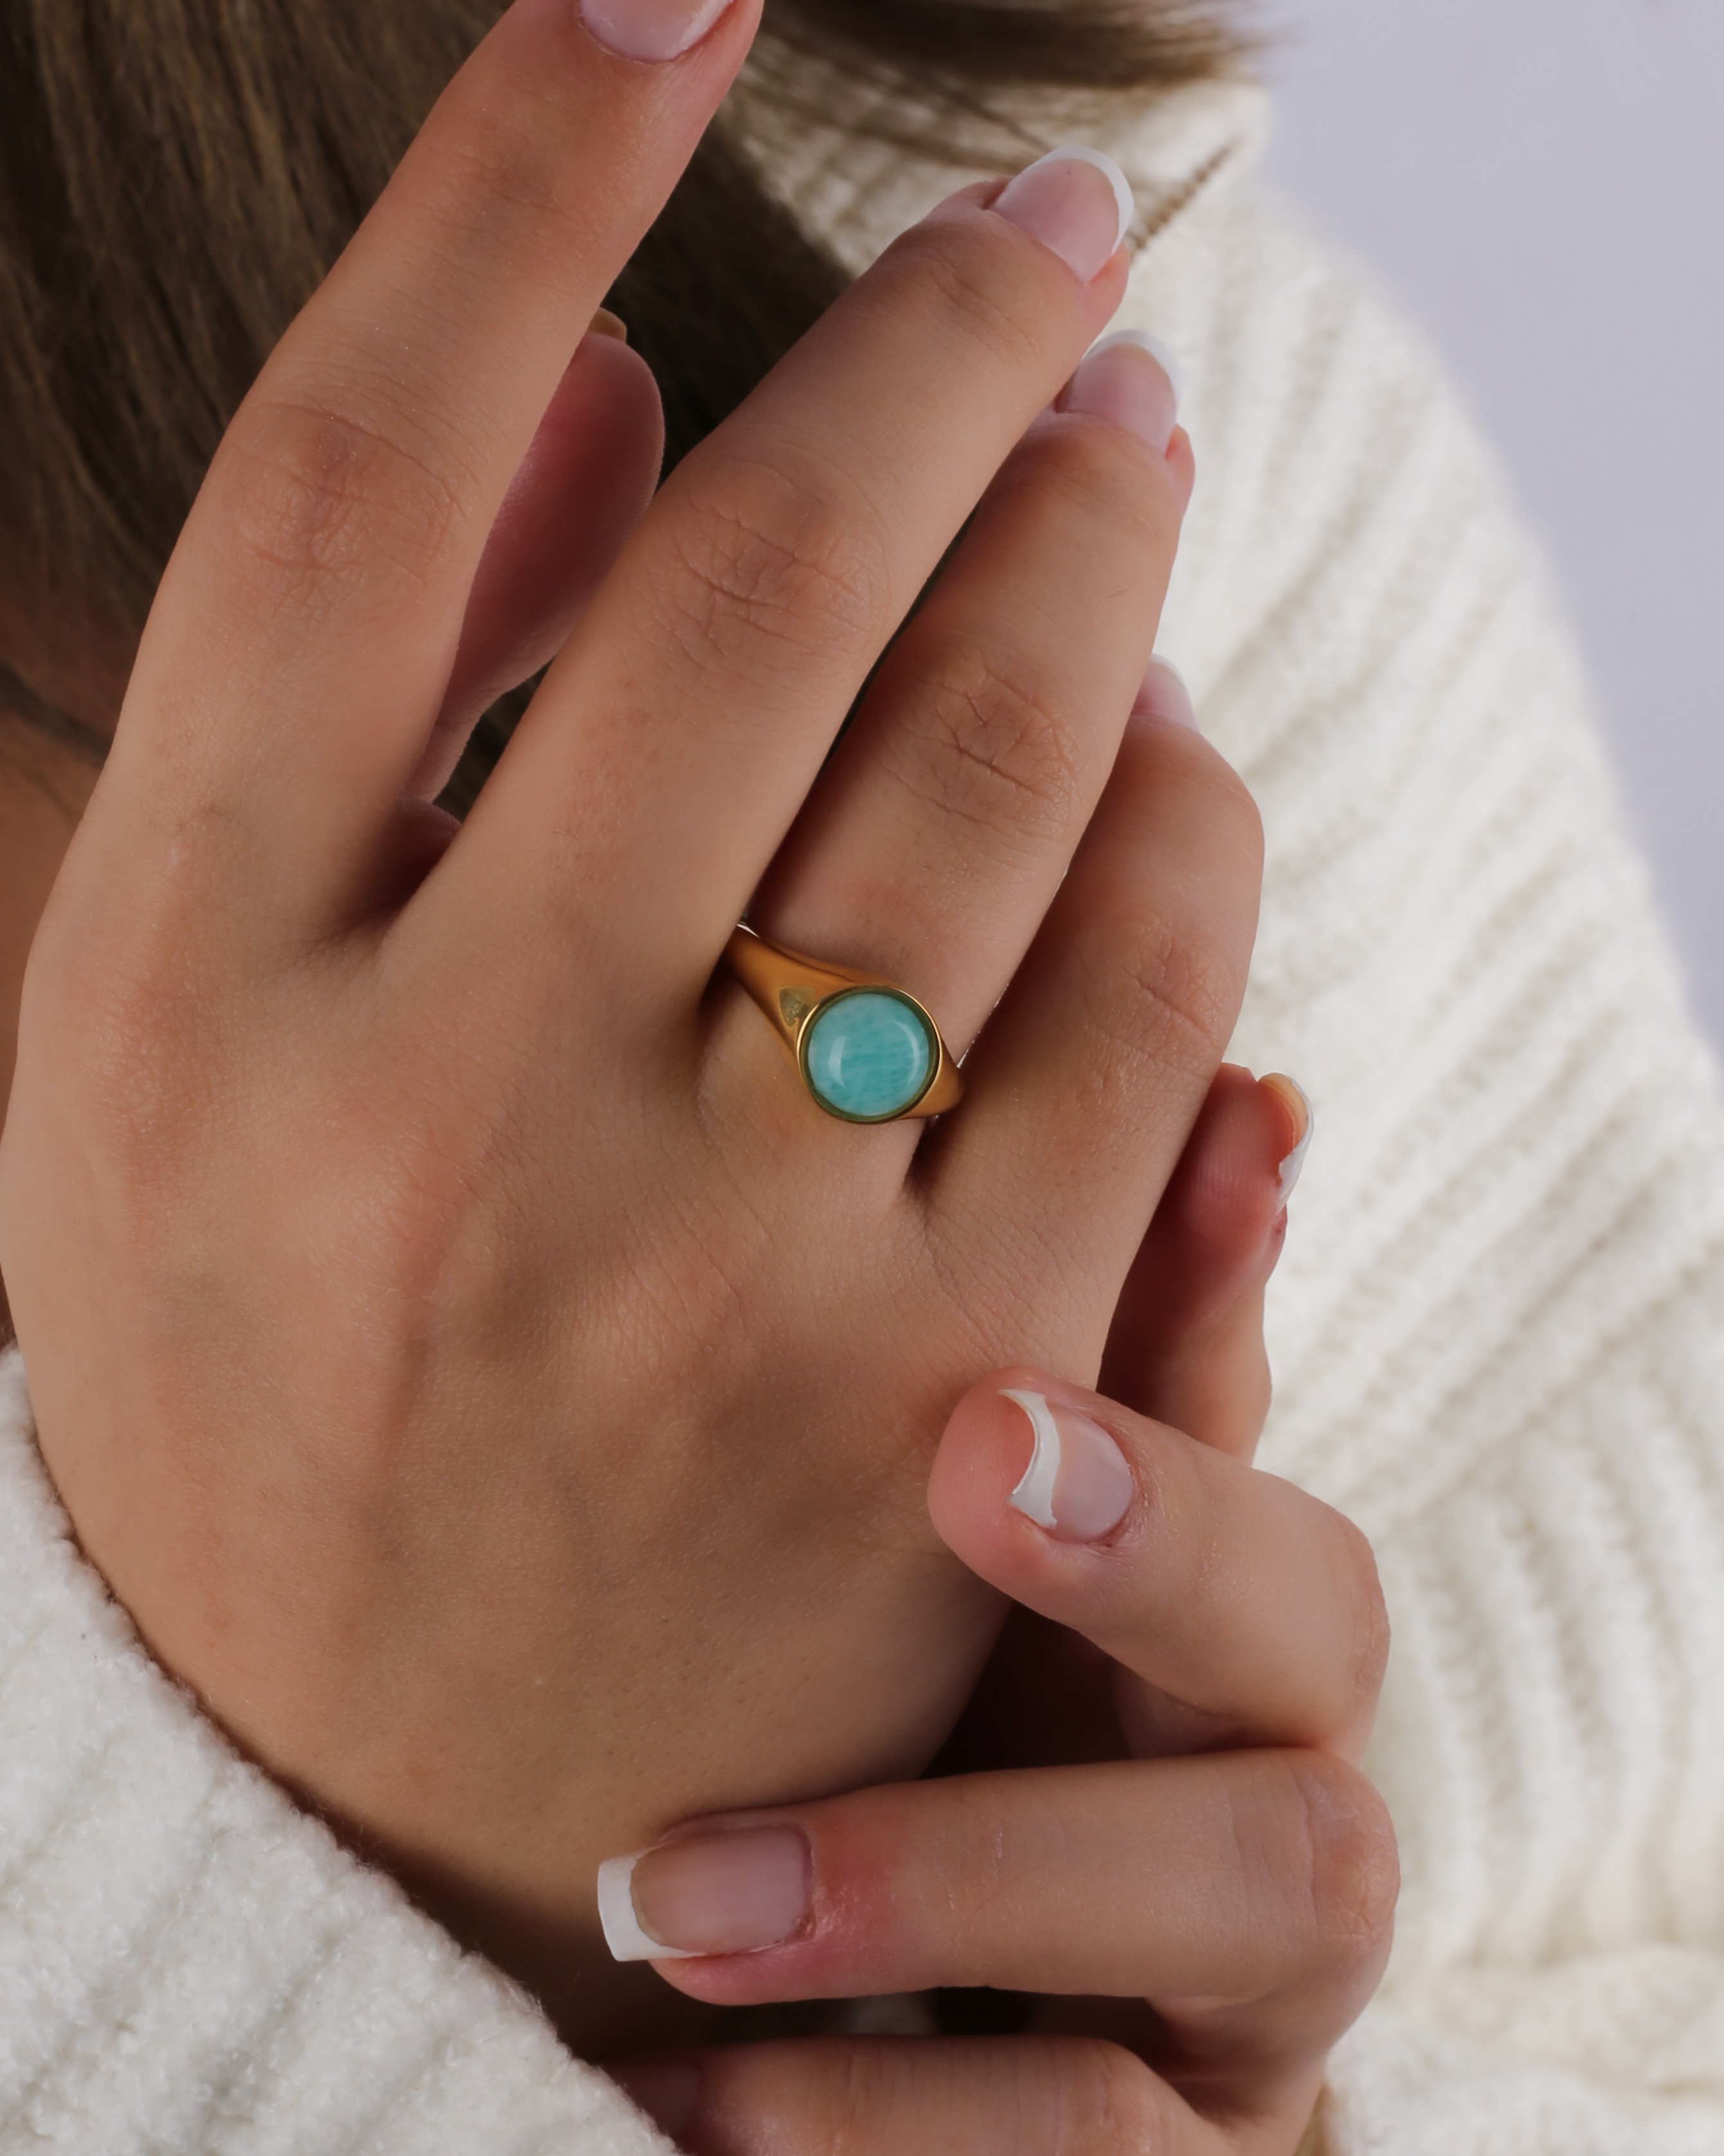 Silver Calypso Ring with Amazonite Stone - Gold